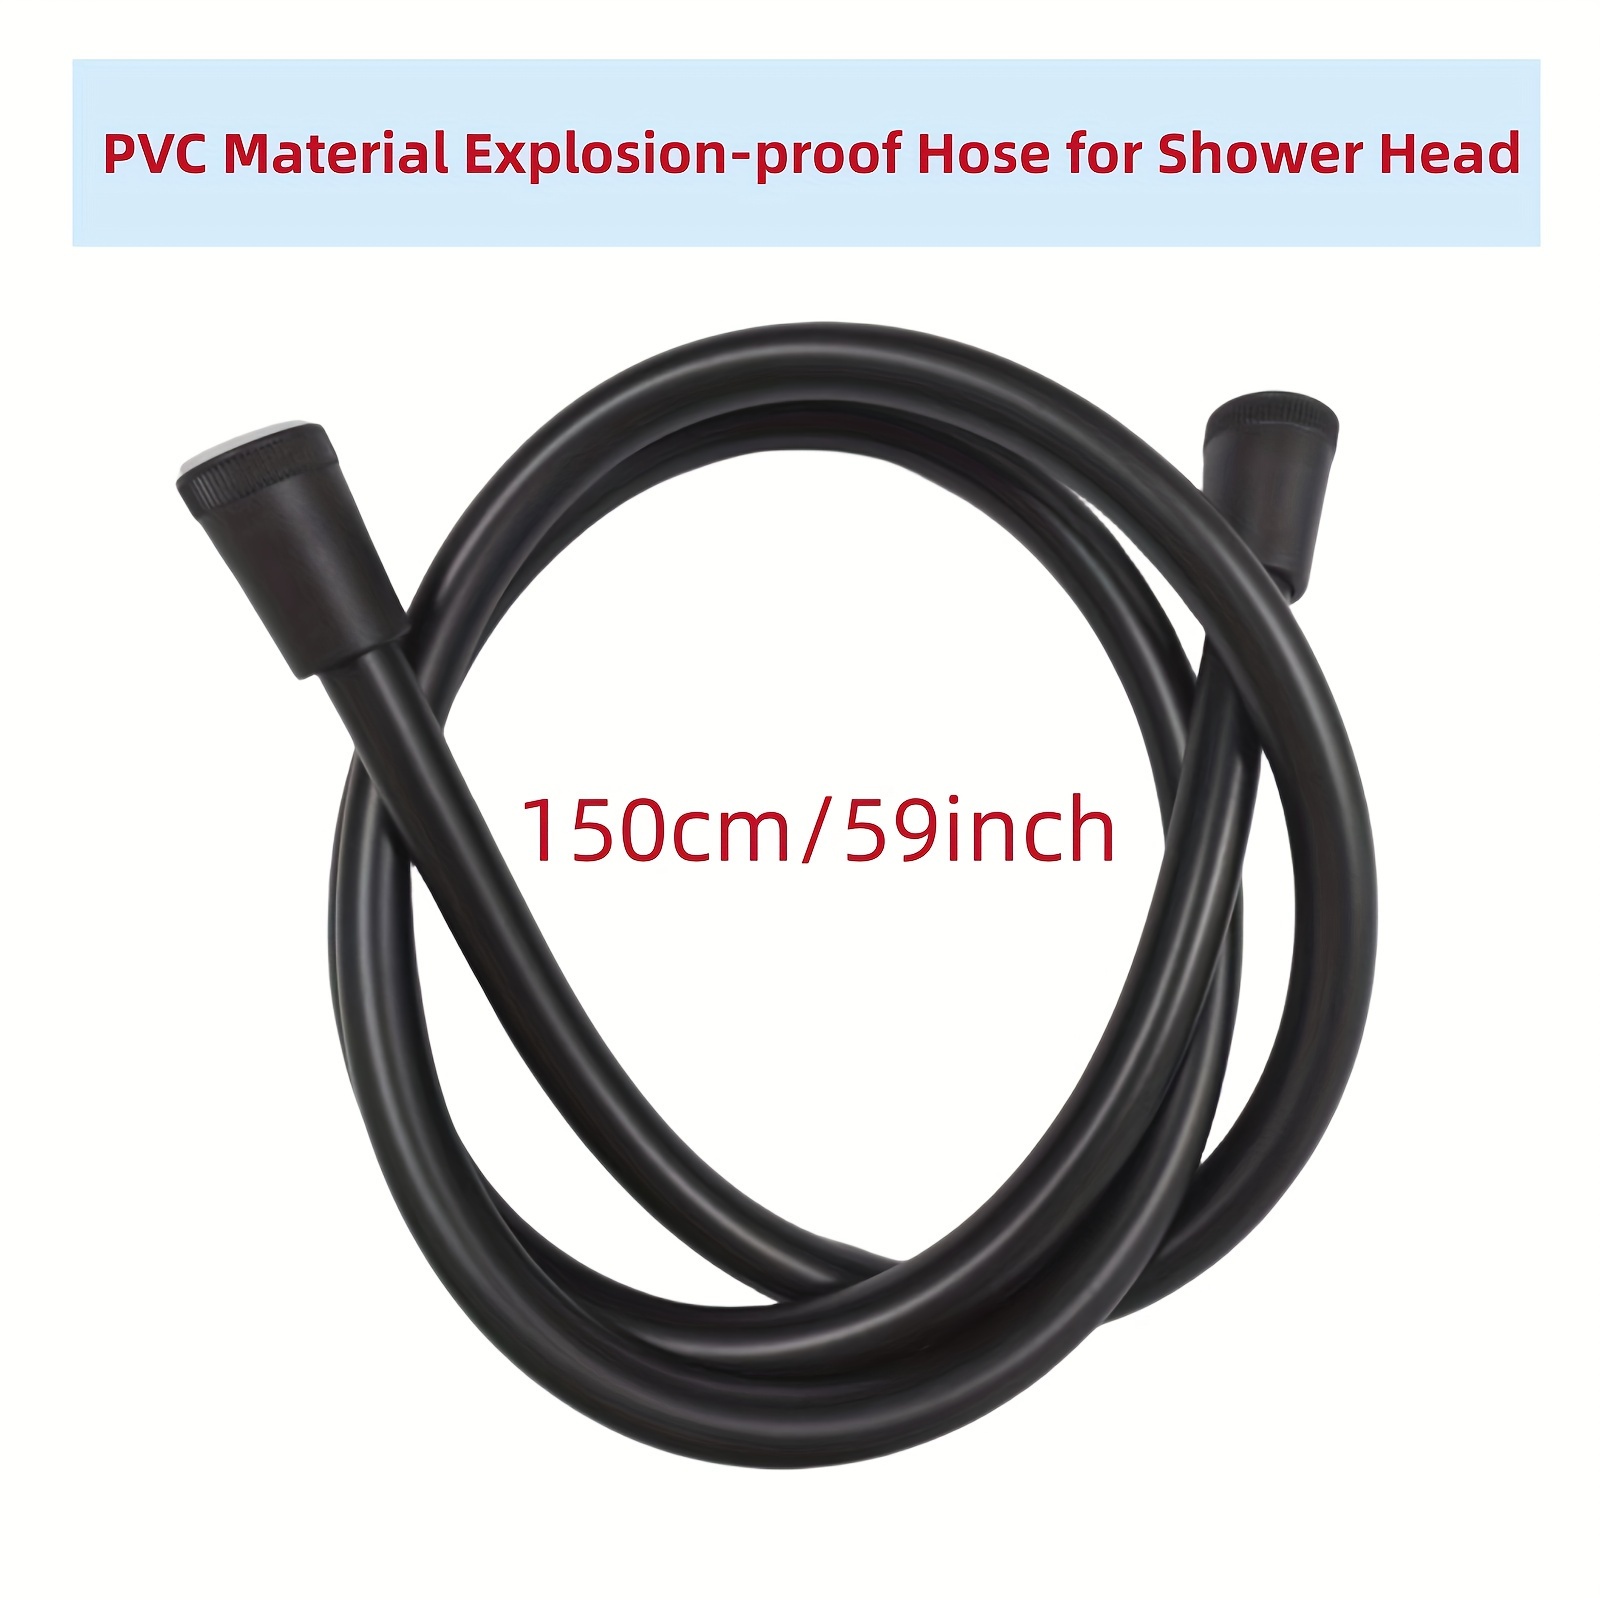 

Pvc Explosion-proof Shower Hose, 360-degree Rotatable Bathroom Hose, High Pressure, Corrosion Resistant, Plastic Material, No Electricity Needed - Black (150cm/59inch)